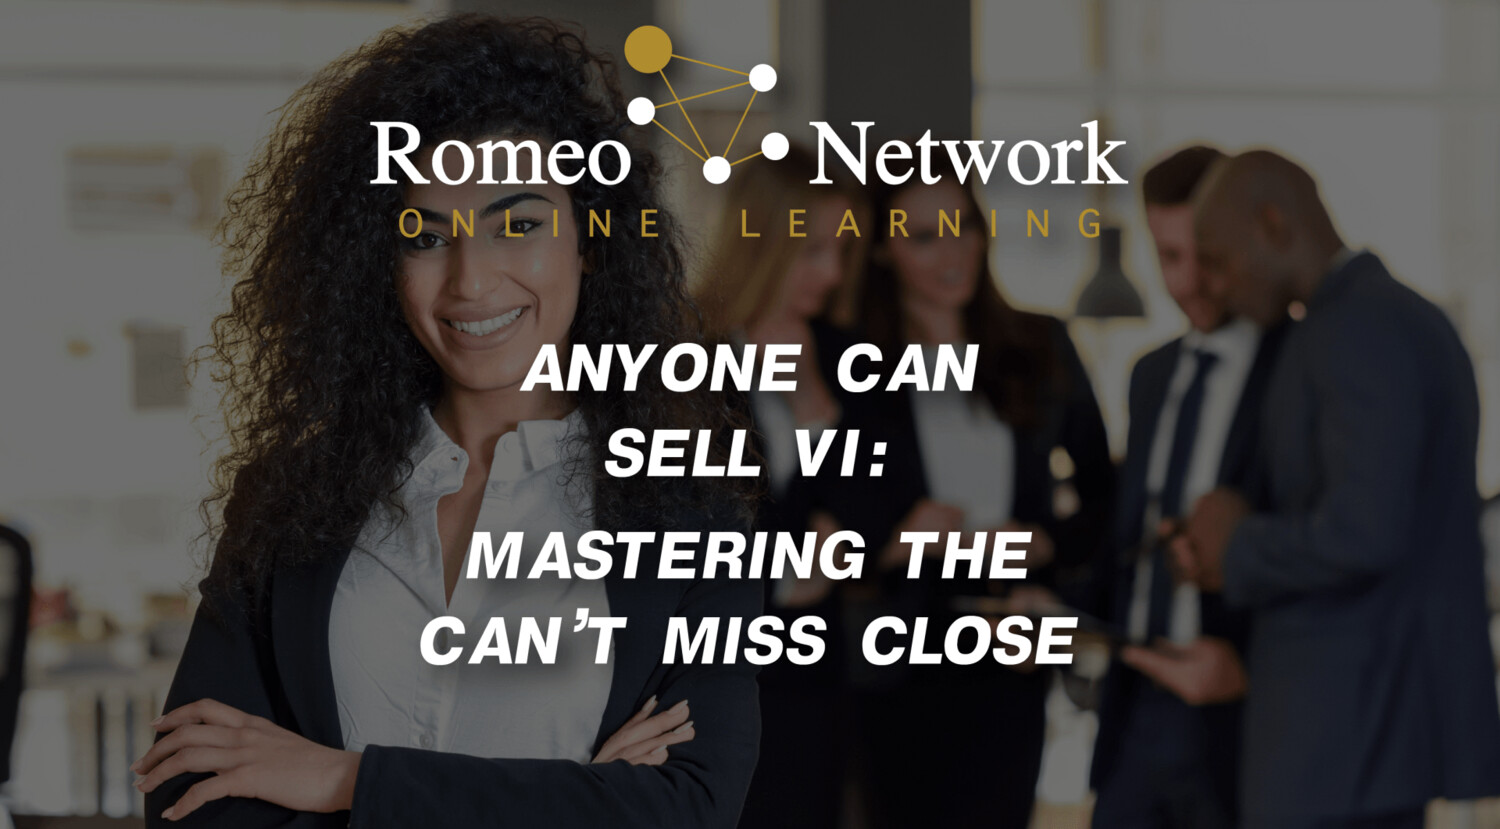 Anyone Can Sell VI: Mastering the ‘Can’t Miss’ Close